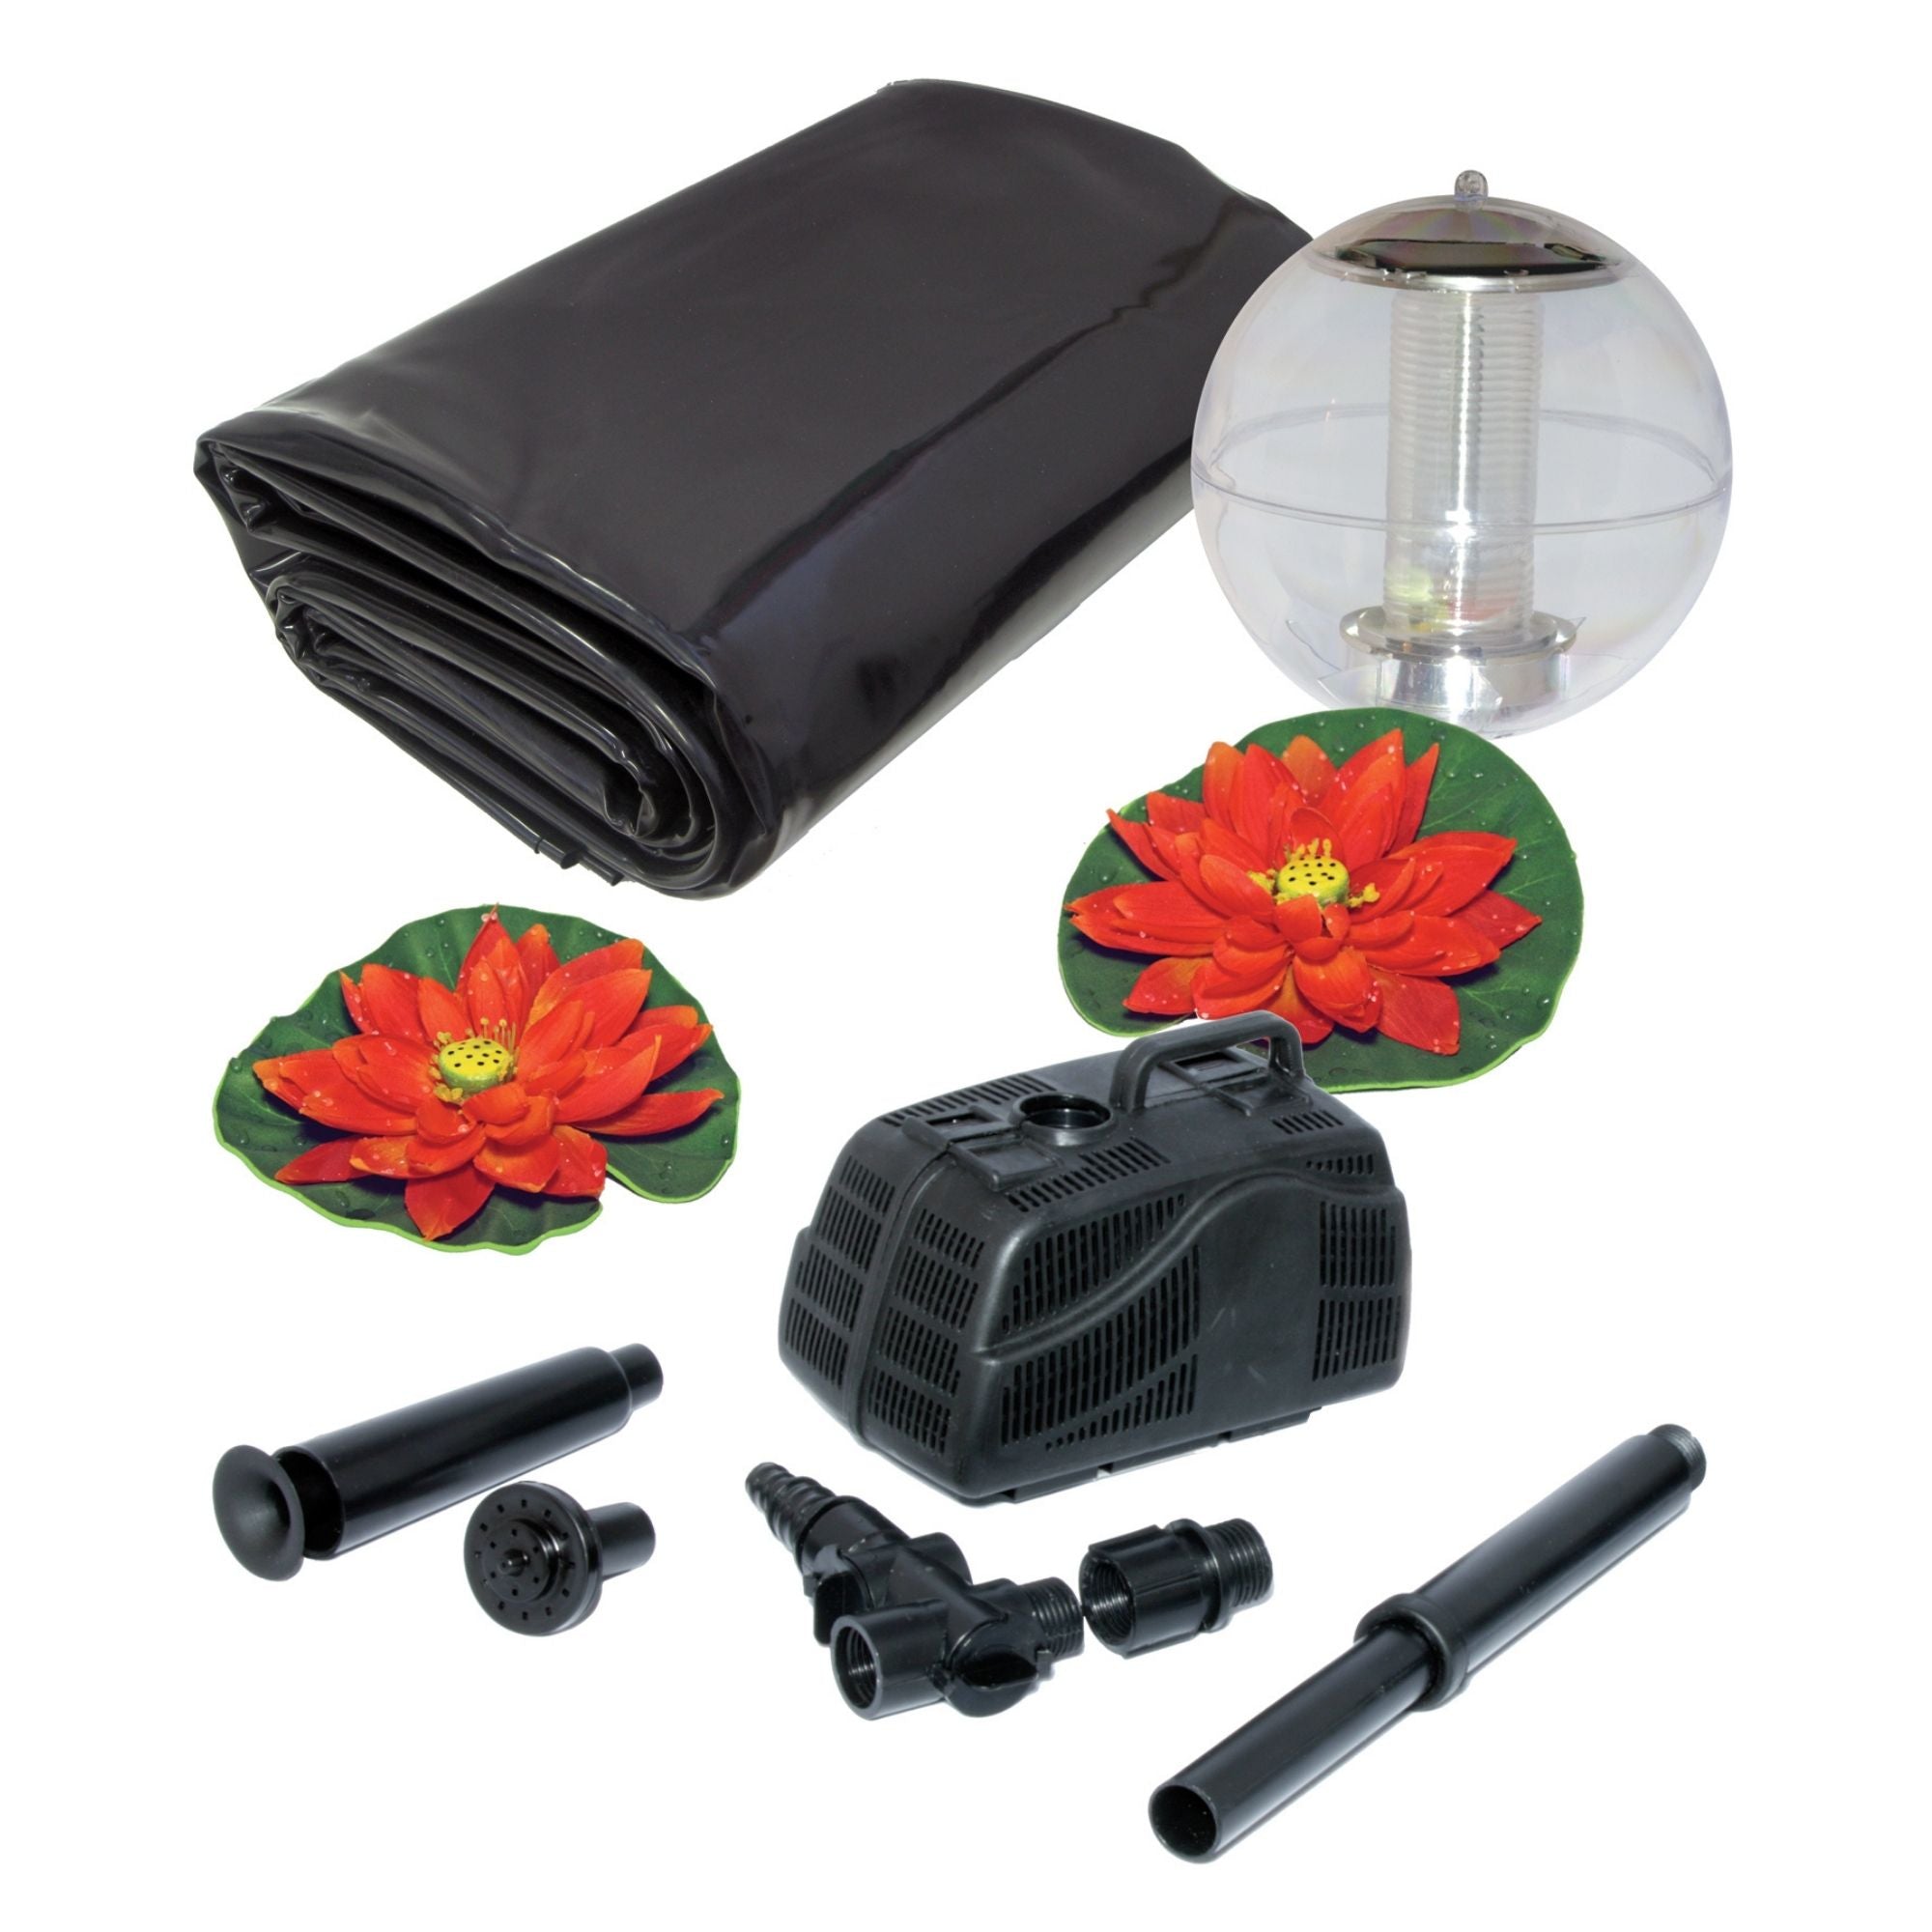 Product shot of items in 400 gal starter pond kit, including folded pond liner, floating solar lantern, two decorative orange water lilies, and 340 GPH pump, on a white background